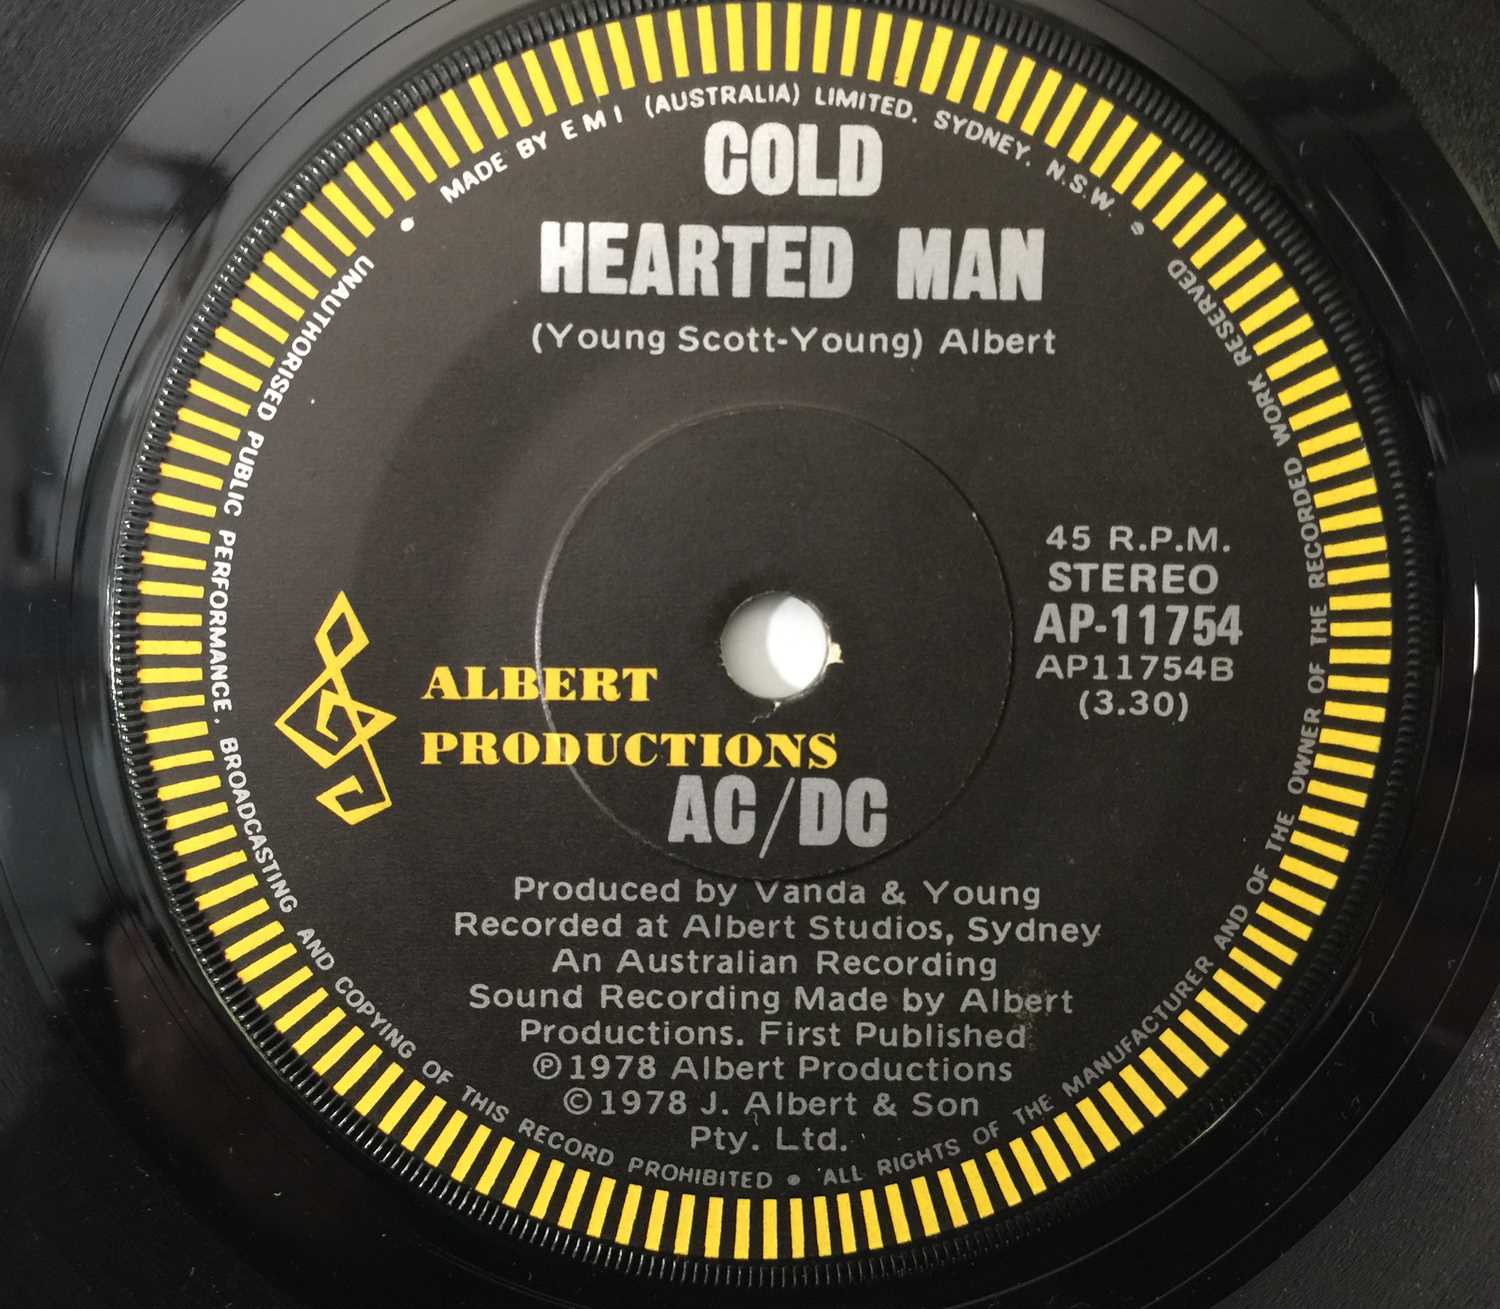 AC/DC - ROCK N ROLL DAMNATION/ COLD HEARTED MAN 7" (AUSTRALIAN - AP-11754) - Image 3 of 3